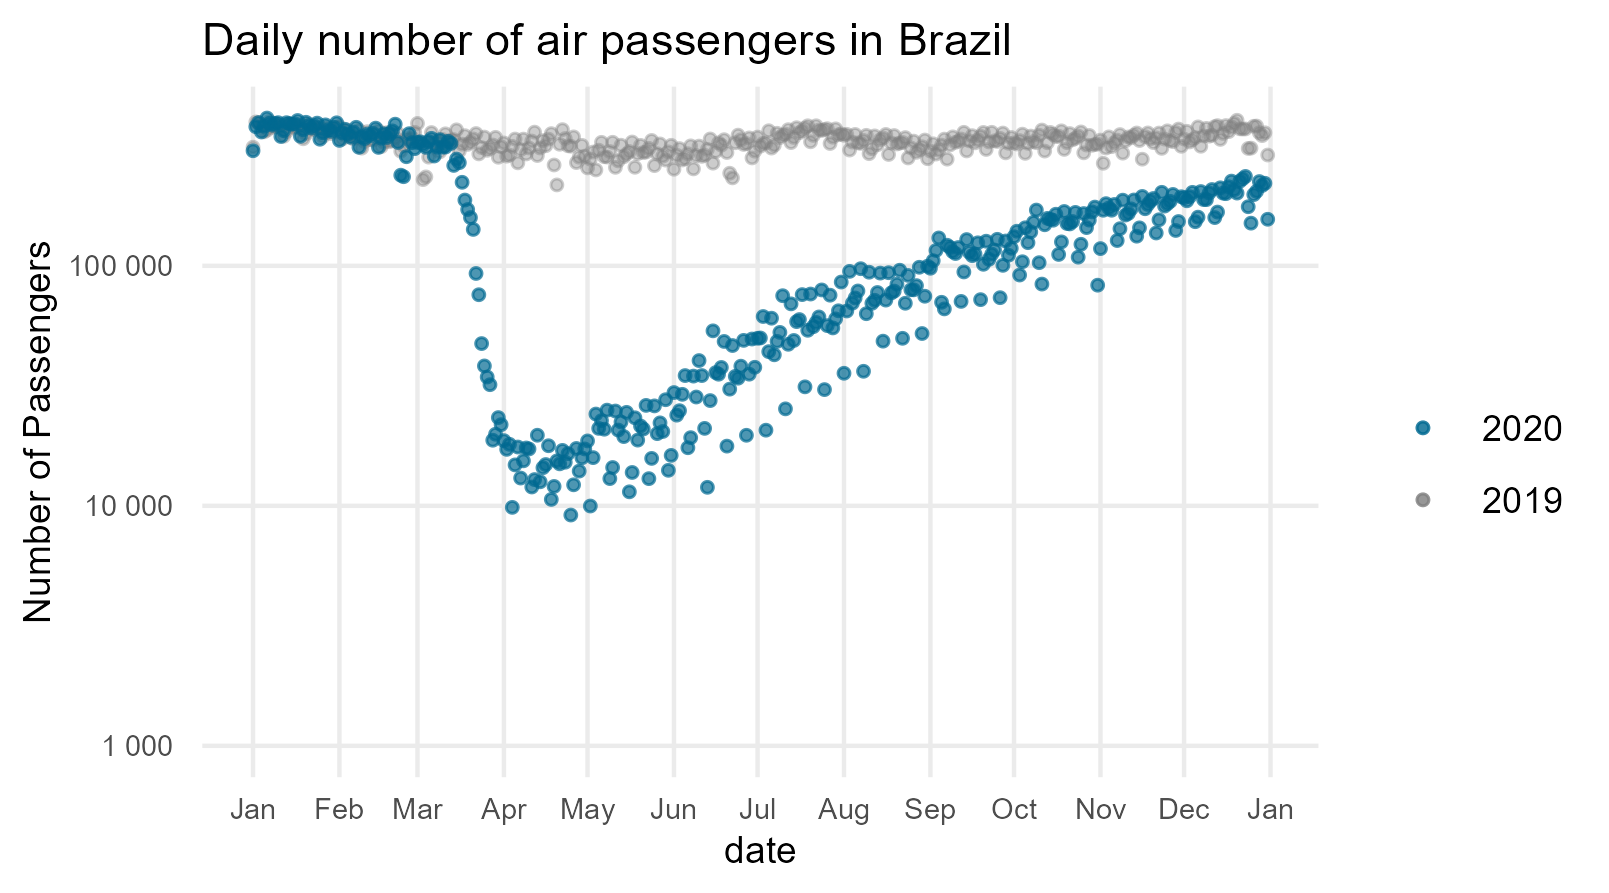 Plot showing daily number of flights in Brazil for 2019 and 2020